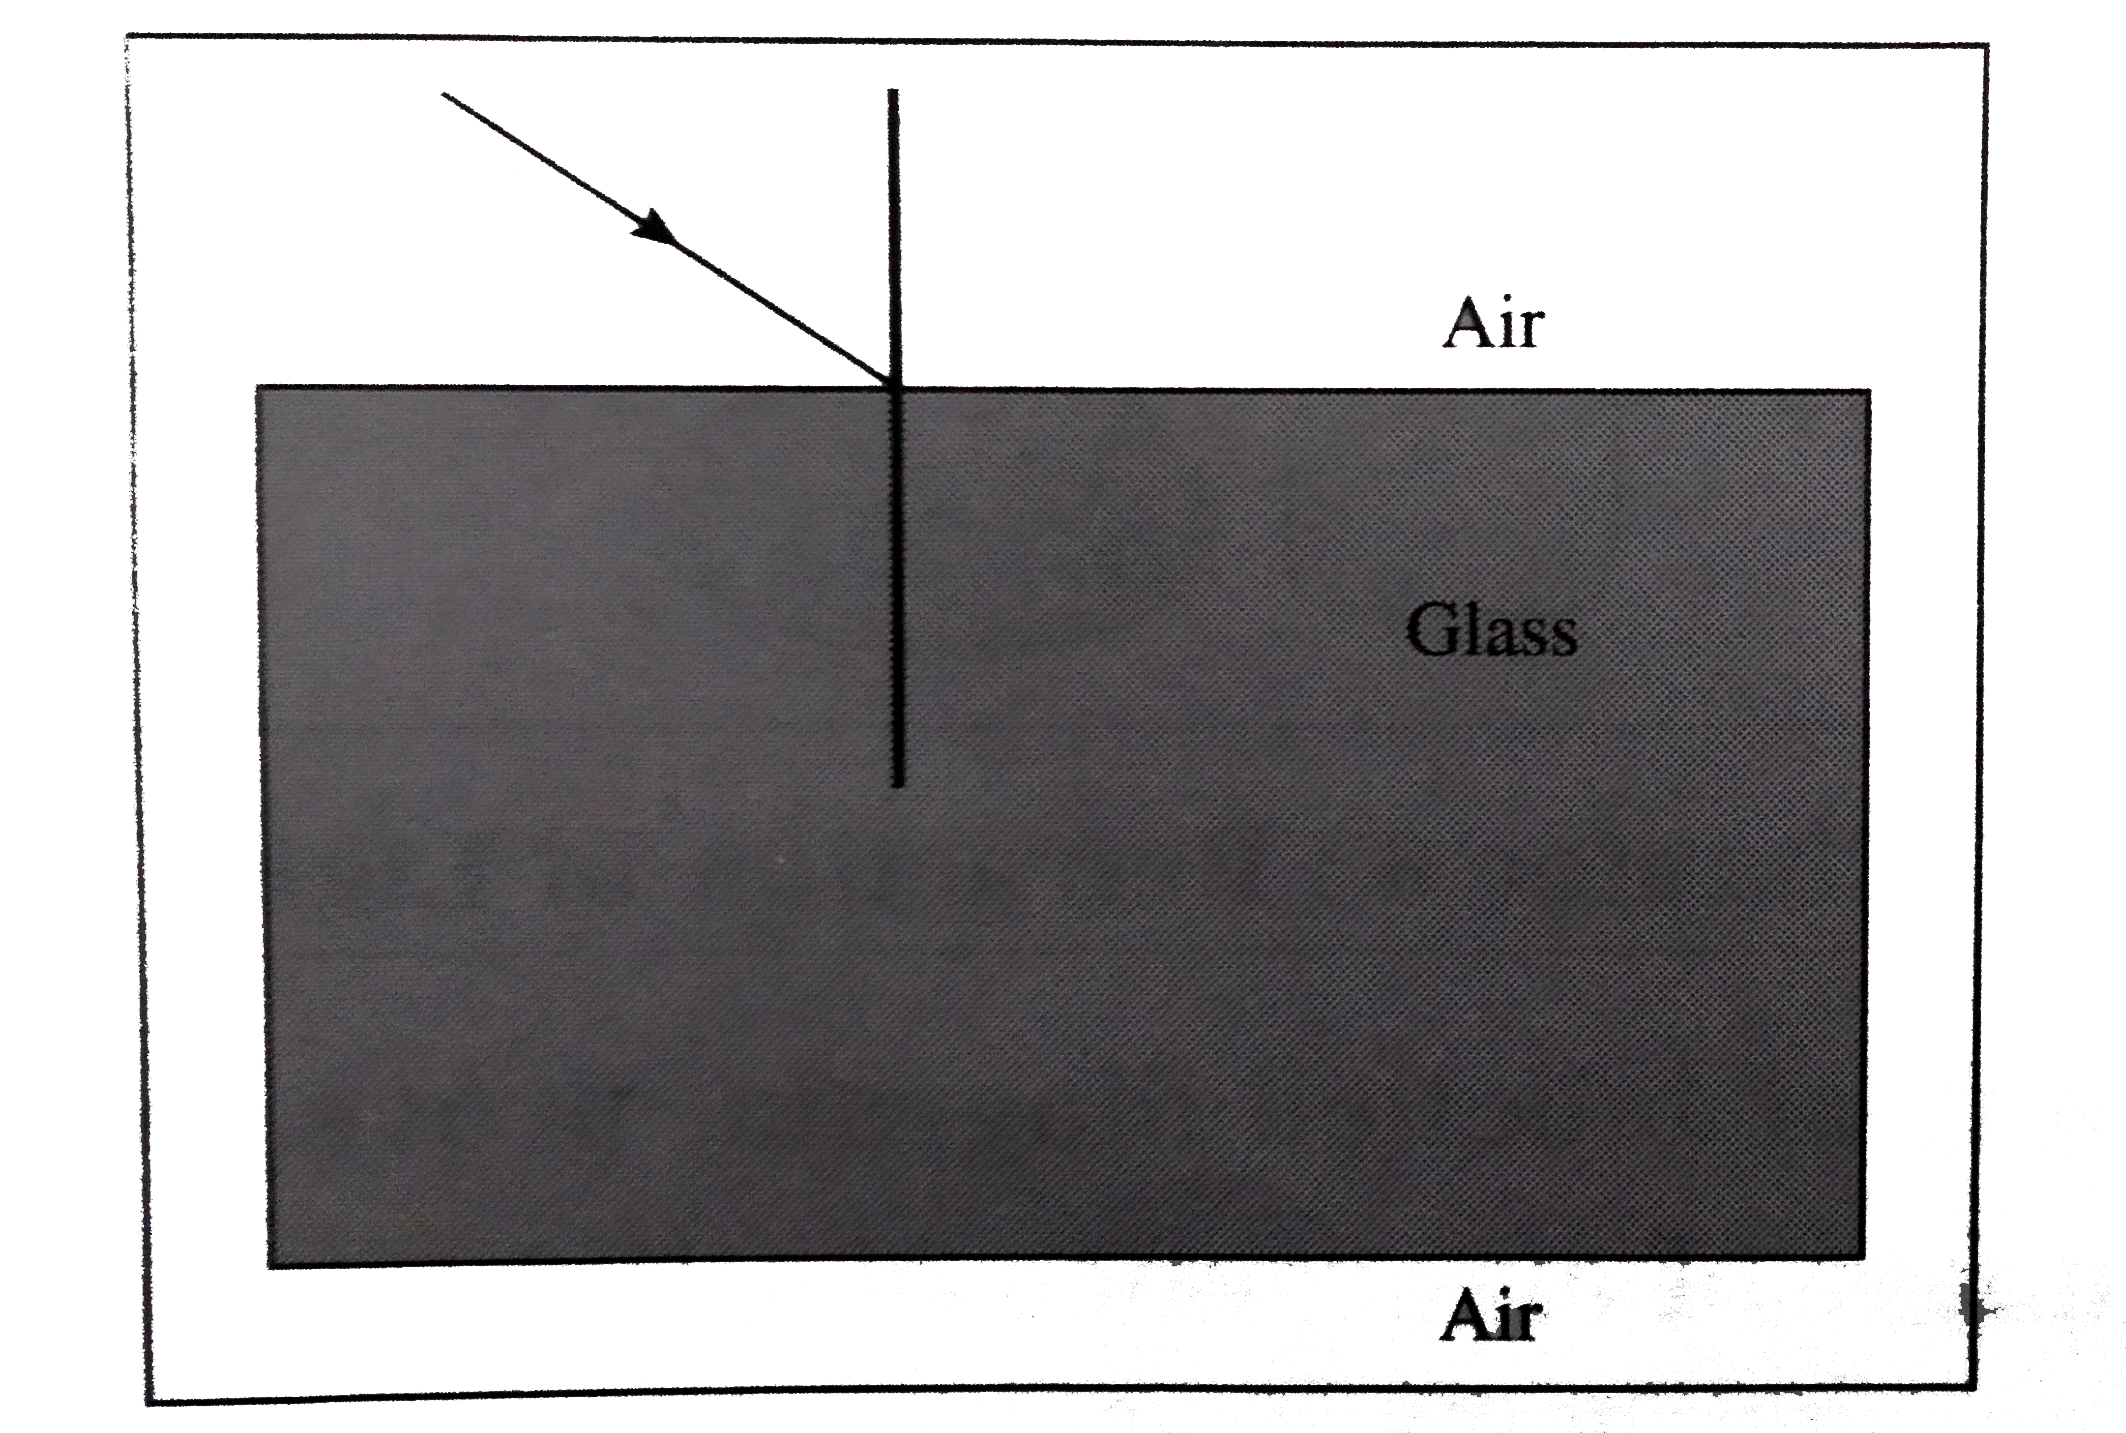 Complete the following ray diagram to show refraction of light through a glass slab and label the incident ray, refracted ray and emergent ray.